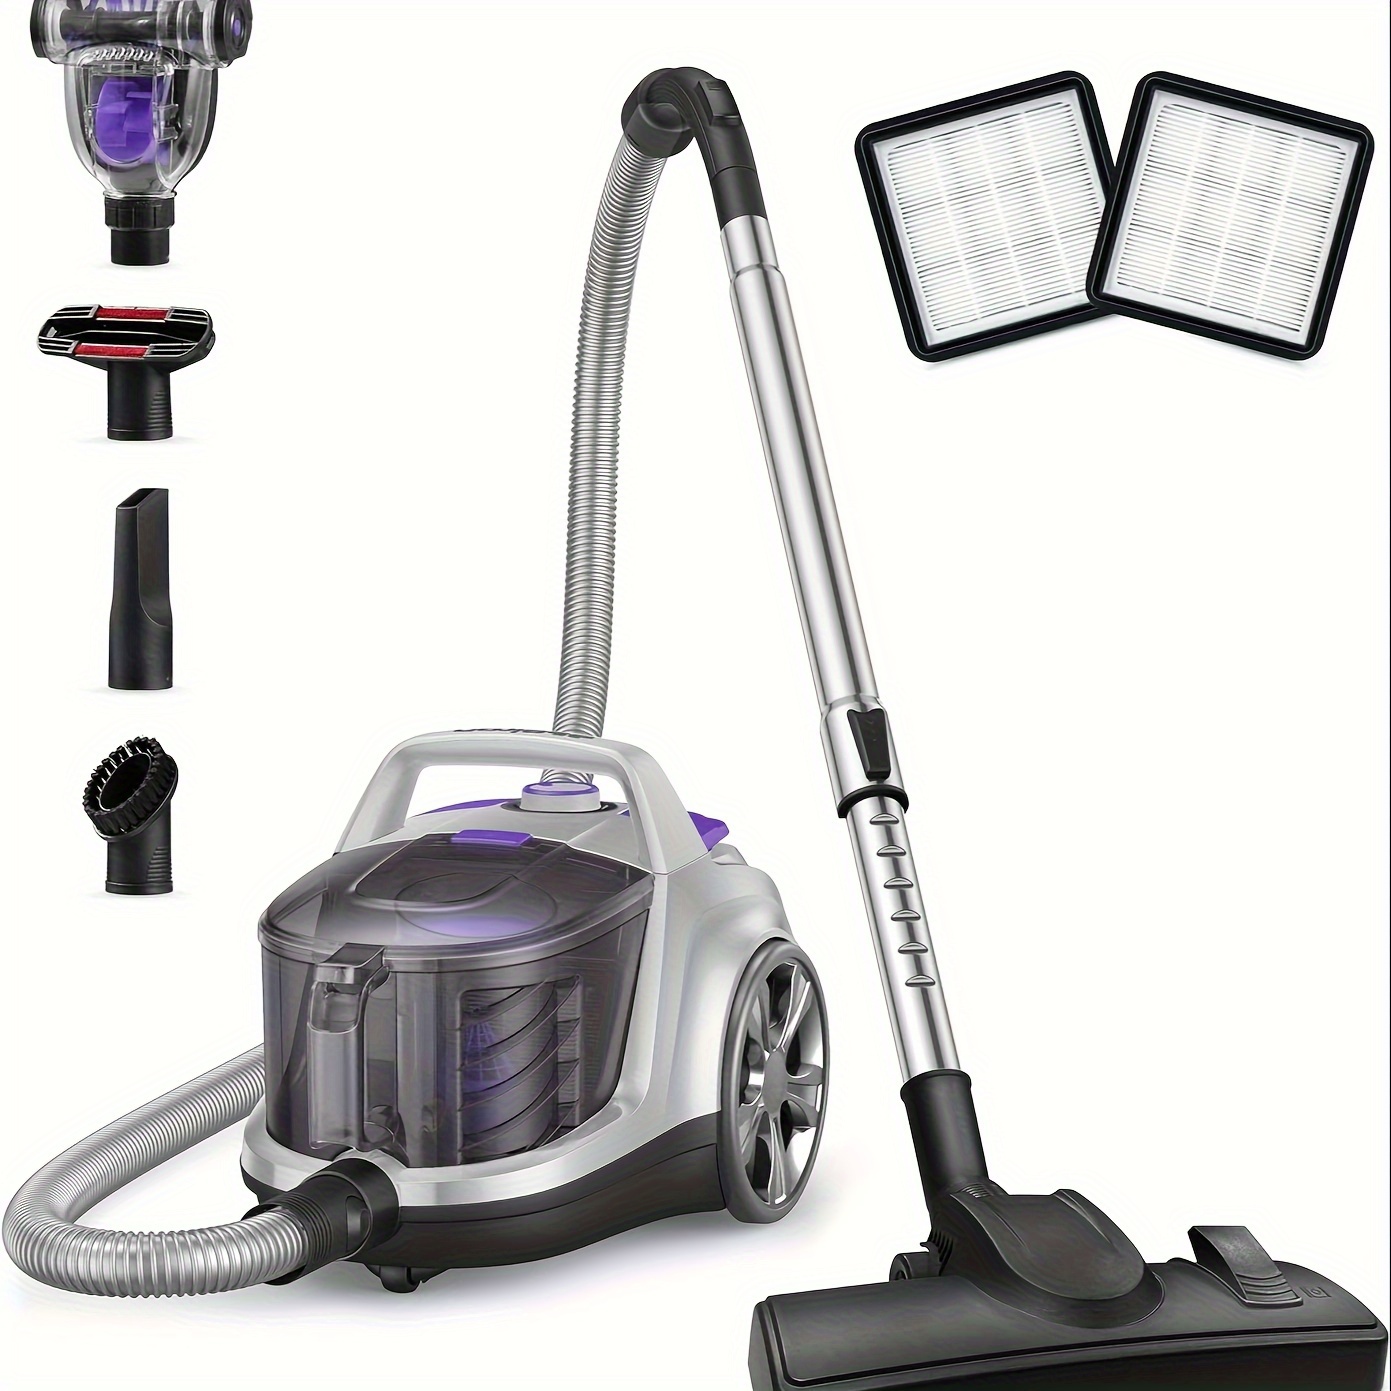 

Canister Vacuum Cleaner, 1200w Bagless, Lightweight, 3.7qt Capacity, 5 Tools, 3 Hepa Filters, For Hard Floors, Carpet, Pet Hair